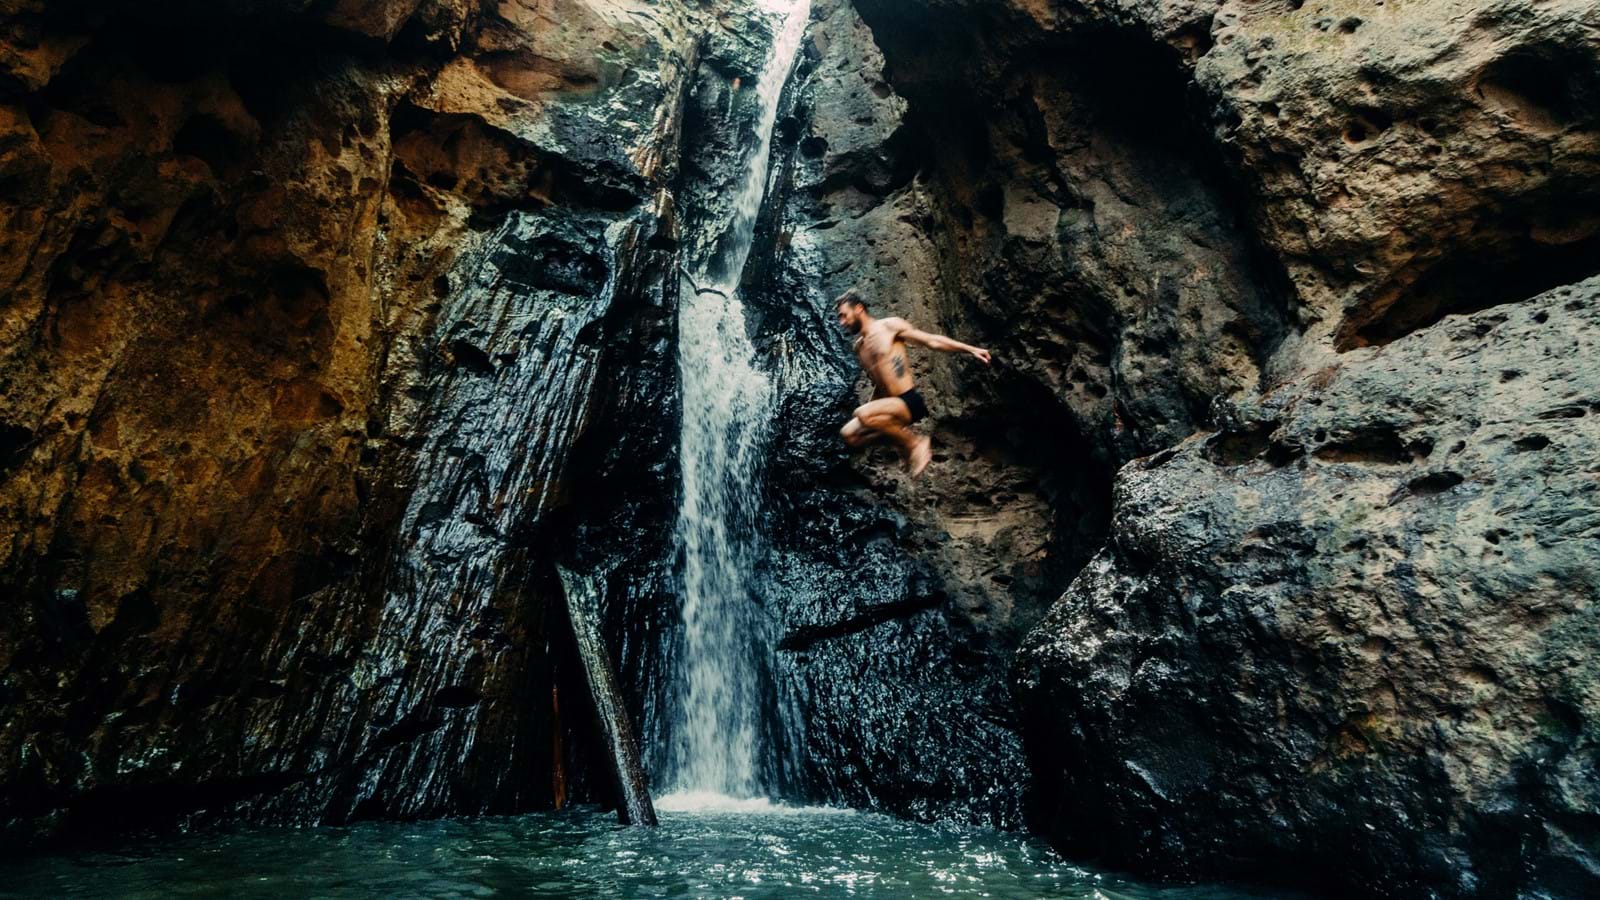 Man jumping from waterfall